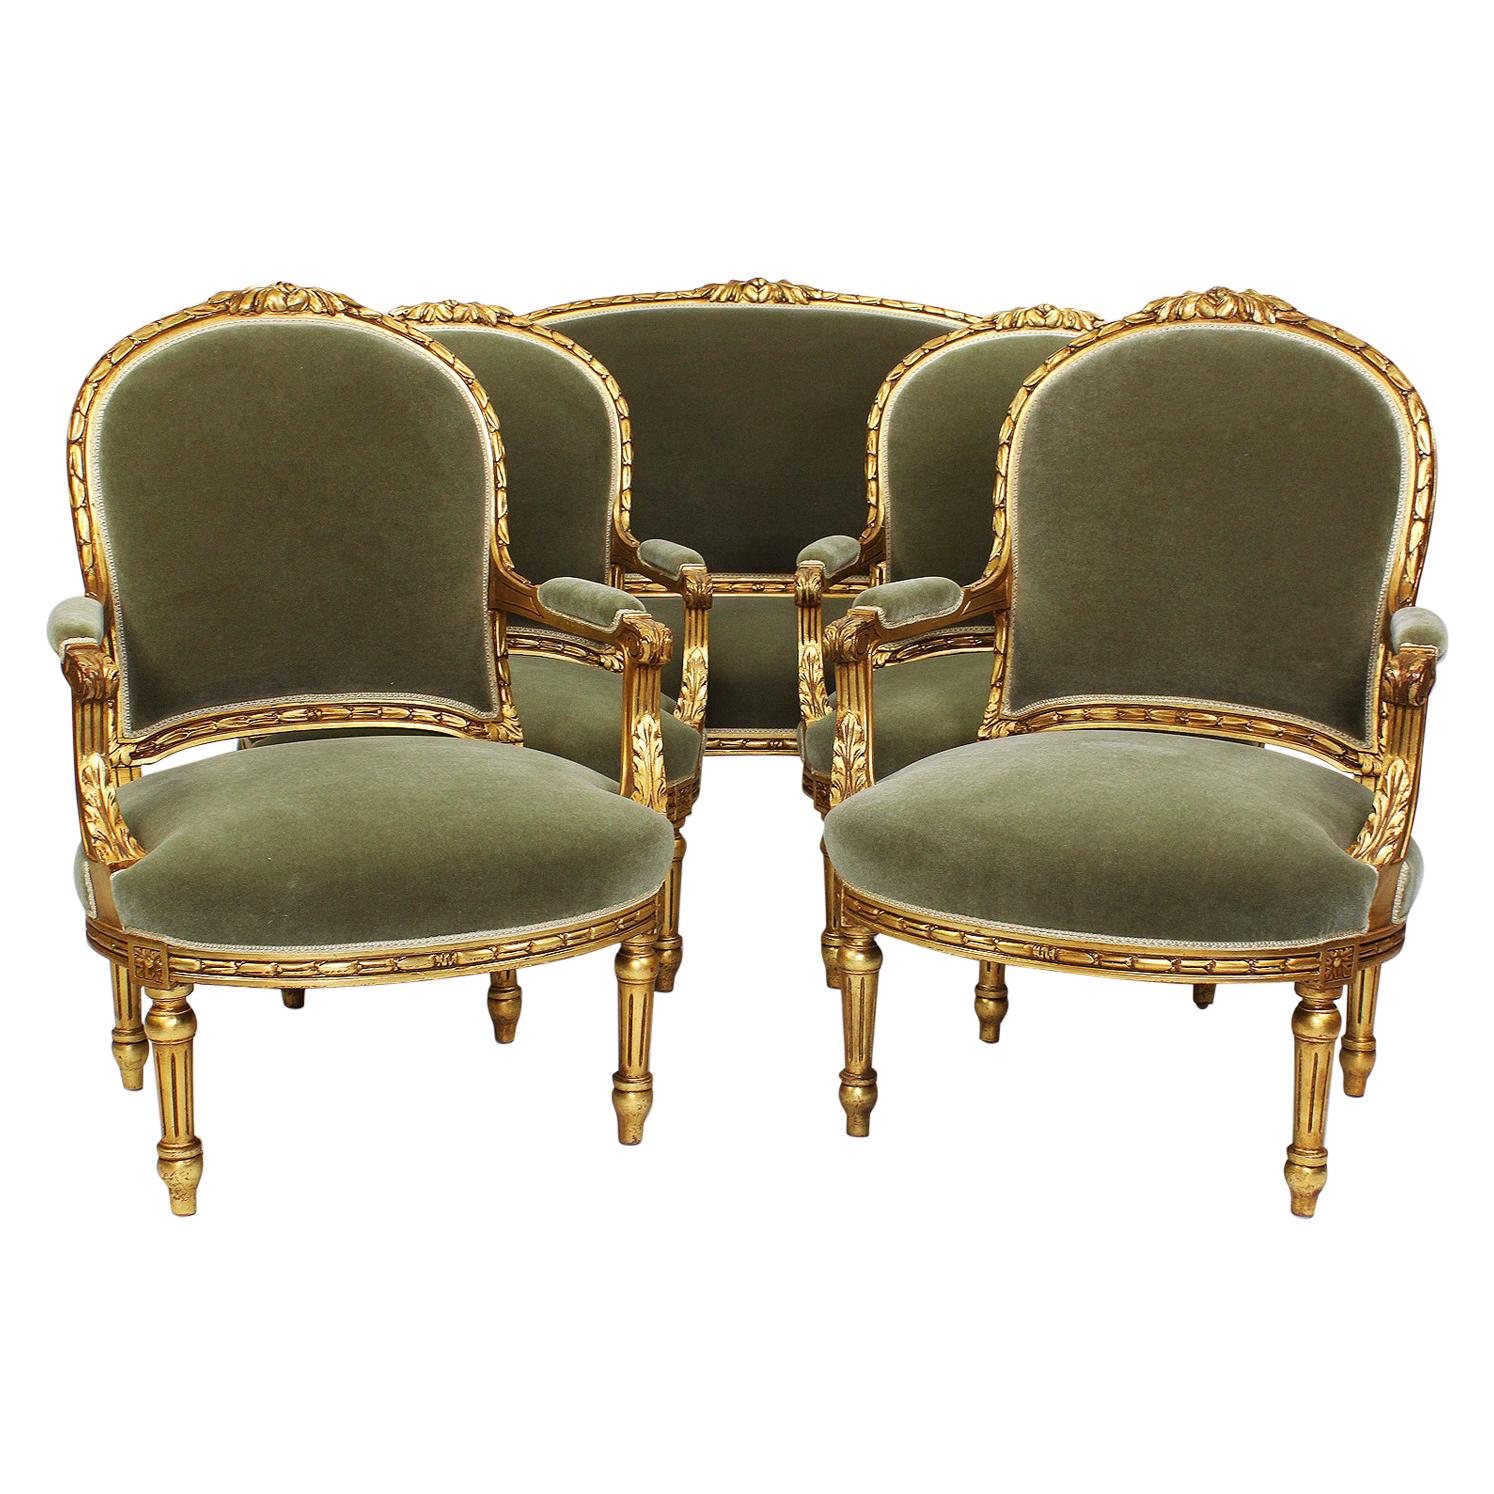 Five Piece French Louis XVI Style Giltwood Carved Salon 'Parlor' Suite